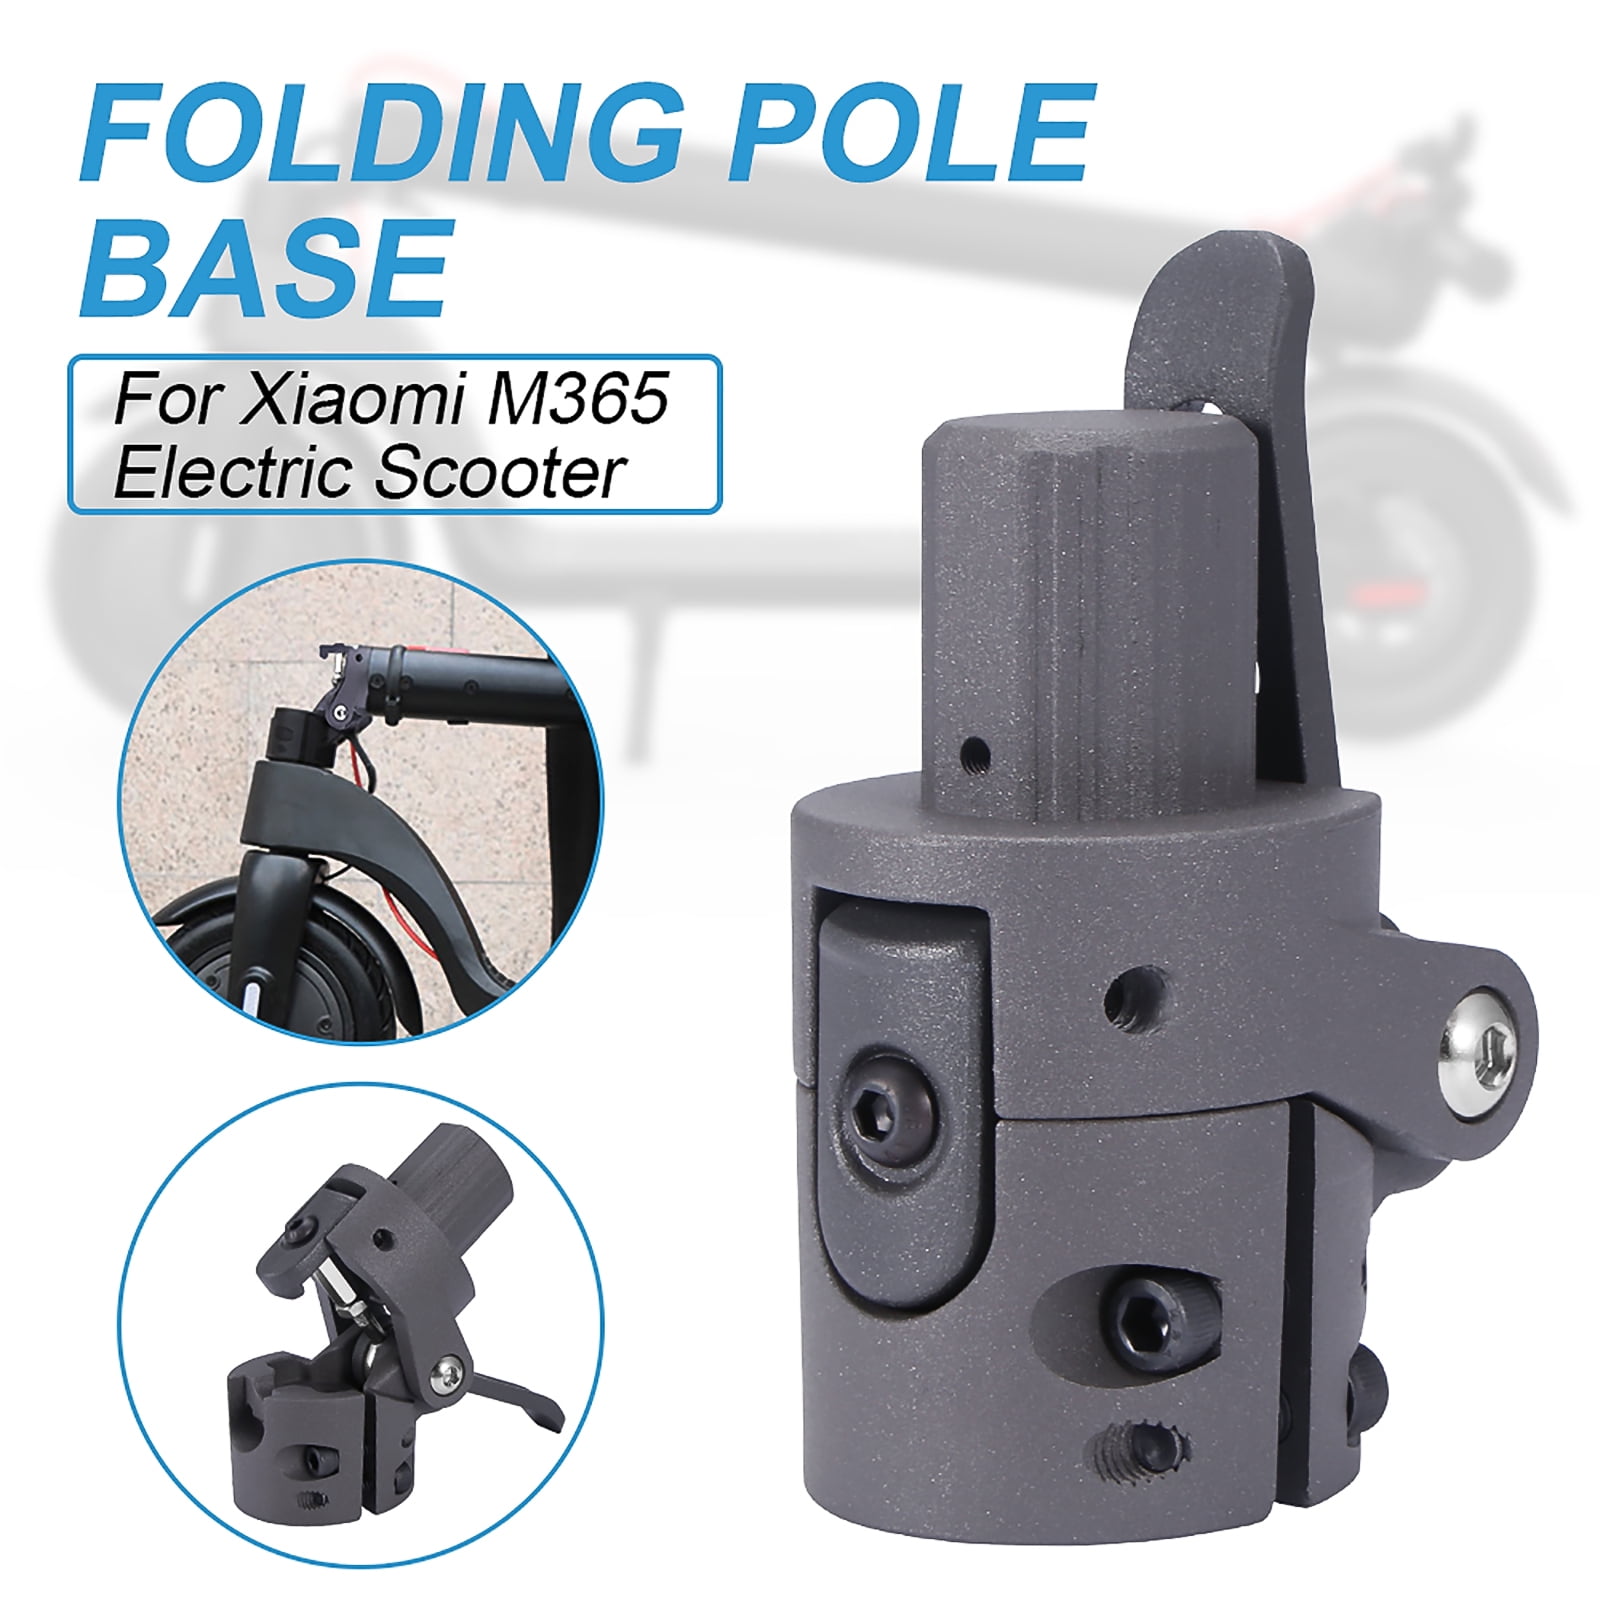 Replacement Folding Pole Base For M365 Electric Scooter Parts Black Foldab 